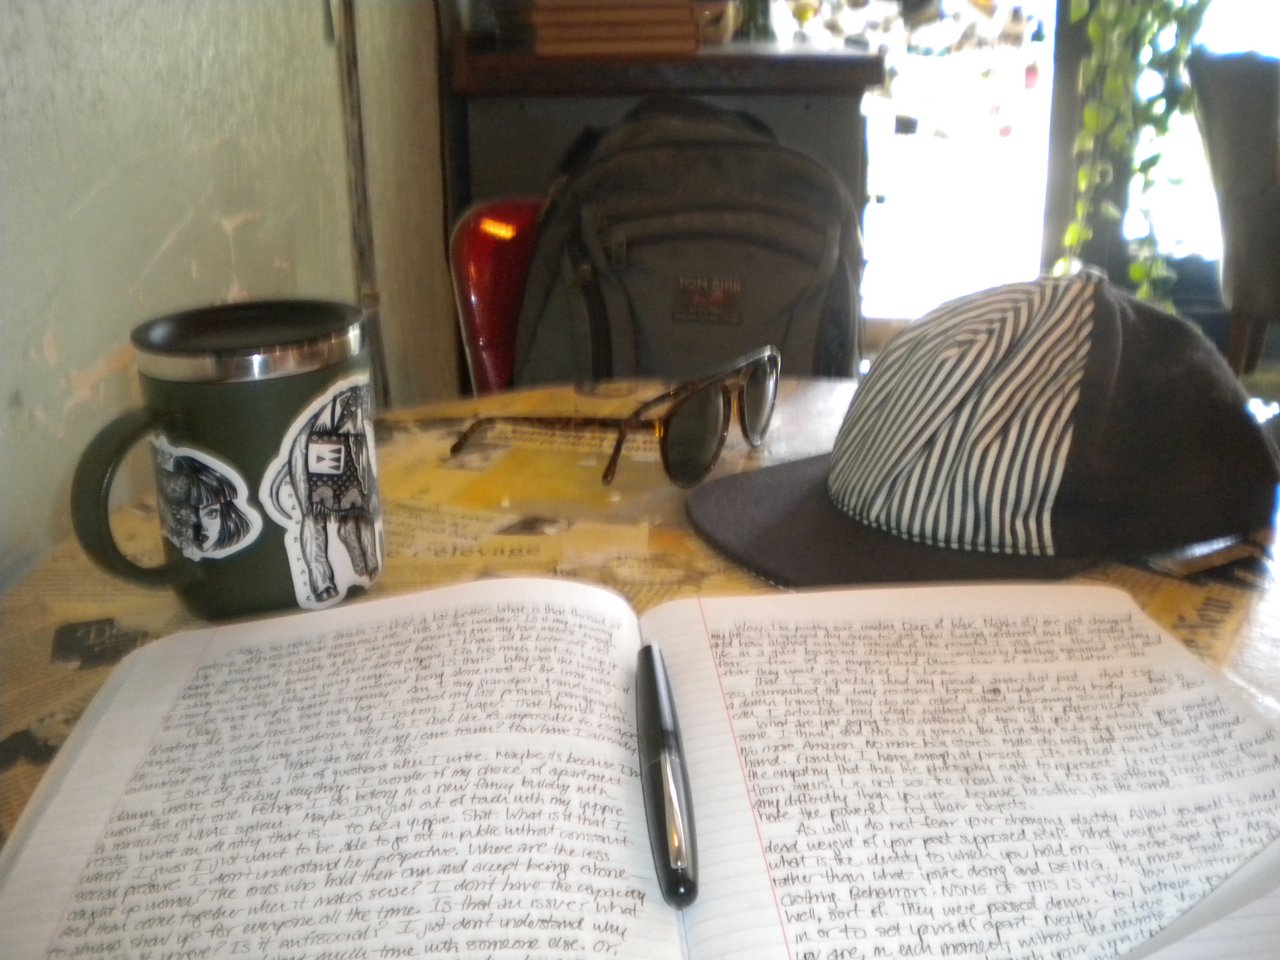 Morning Pages @ Black Crow
Coffee